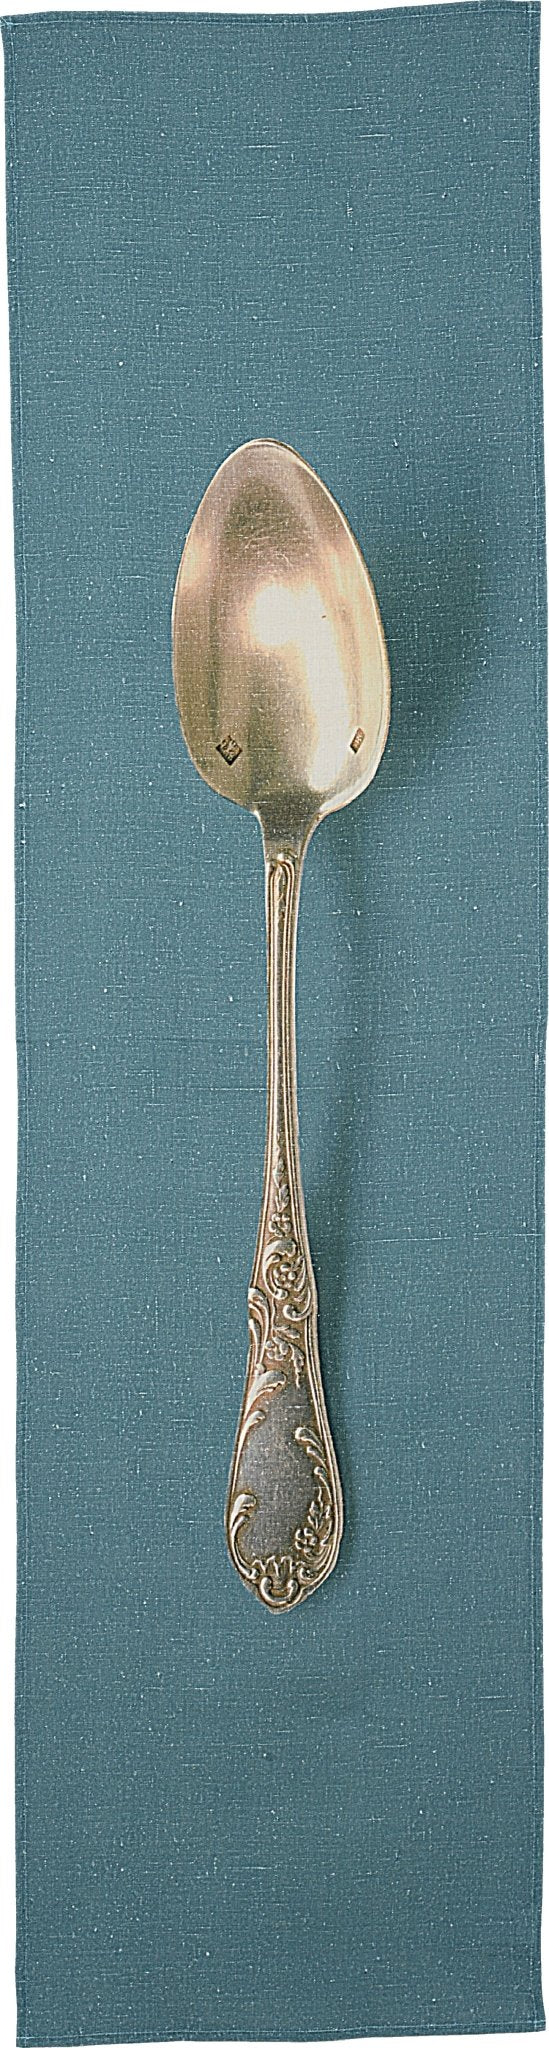 Table runner printed with image of antique spoon - Natalia Willmott